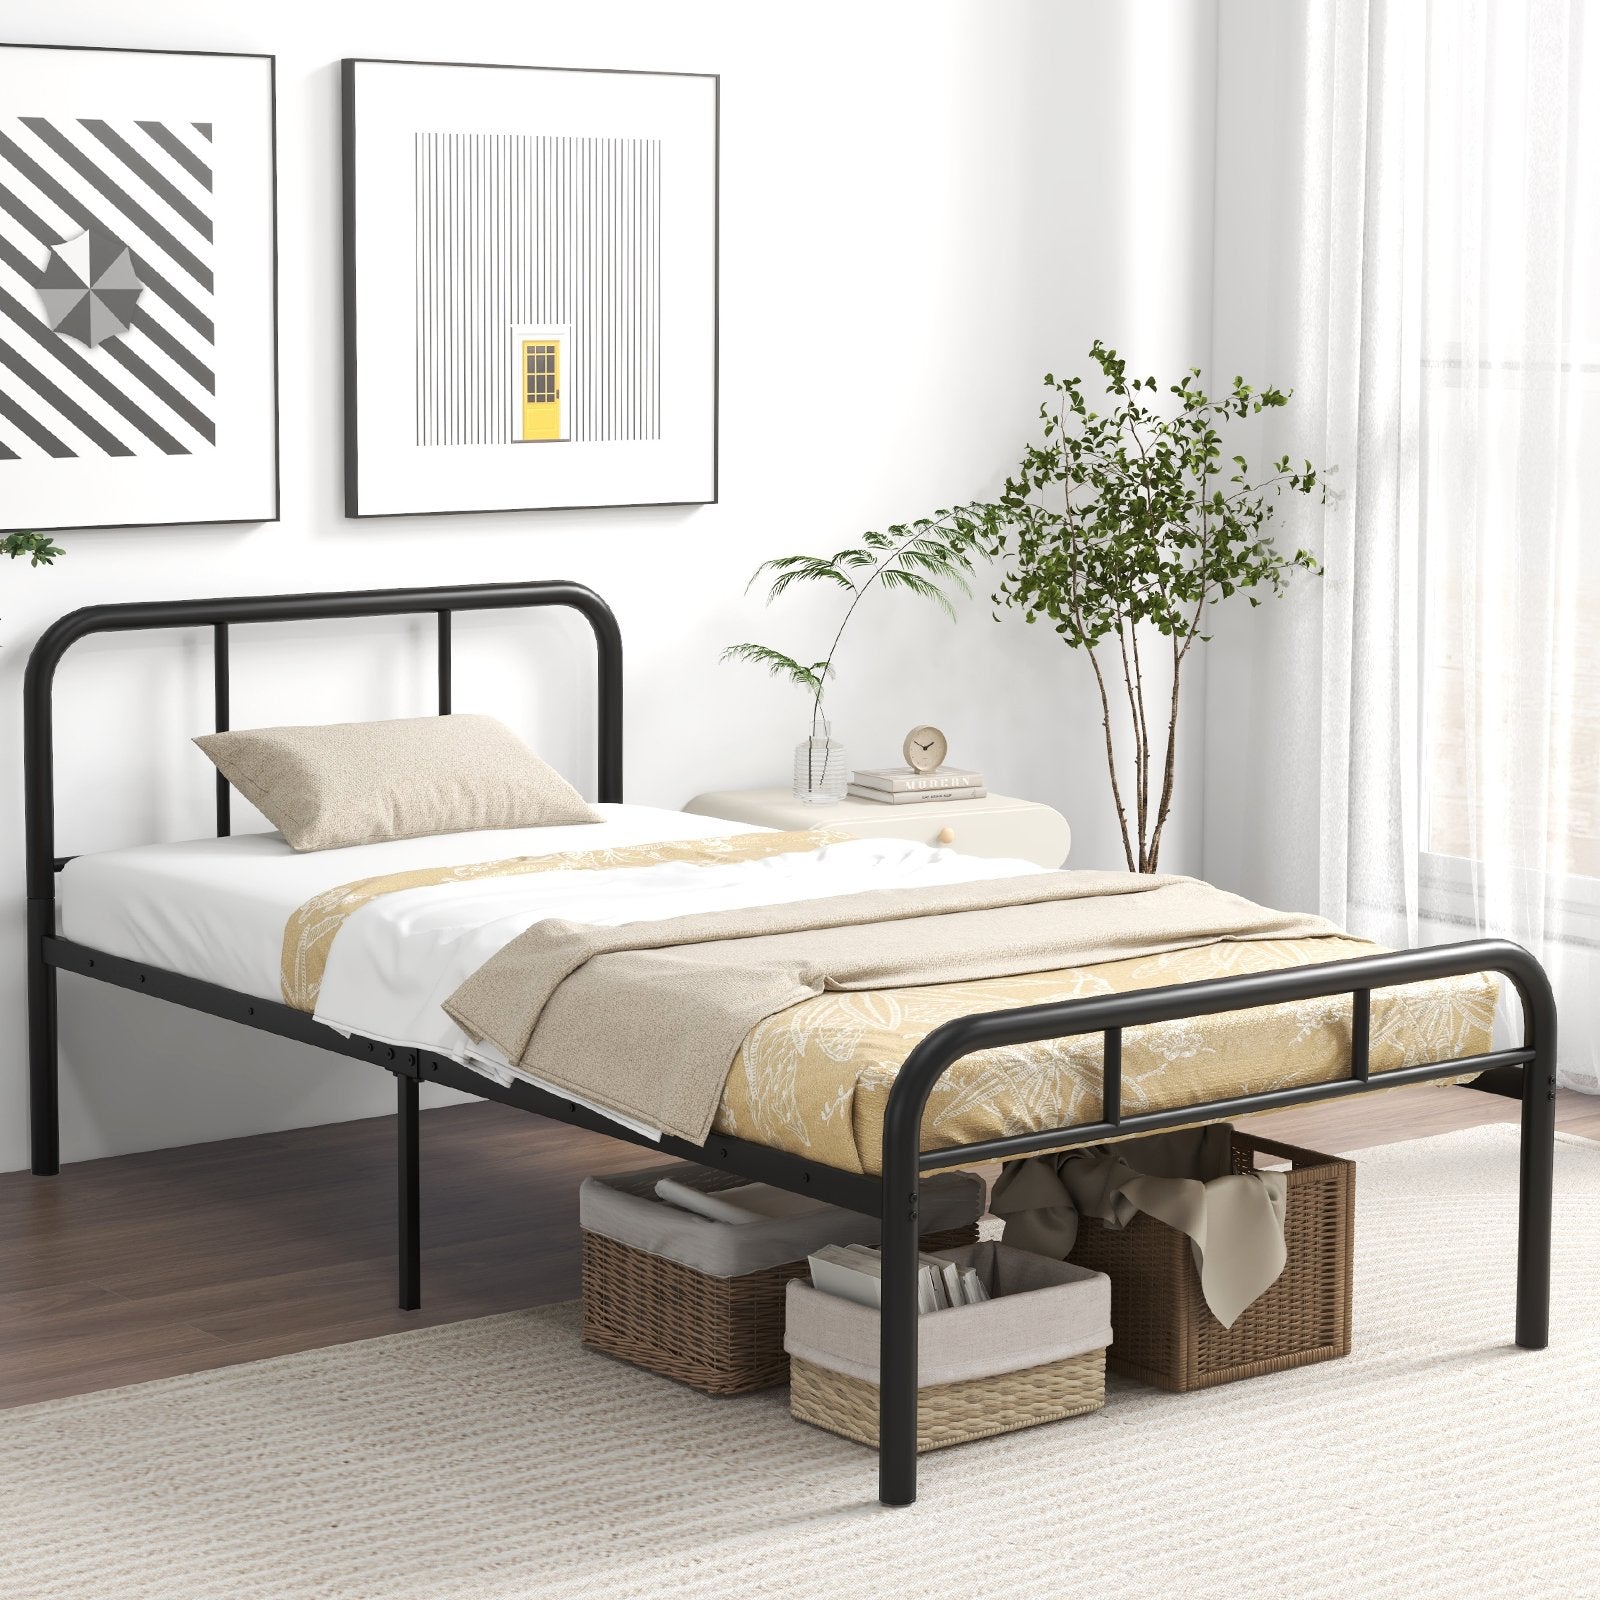 Modern Metal Bed Frame with Curved Headboard and Footboard-Twin Size at Gallery Canada